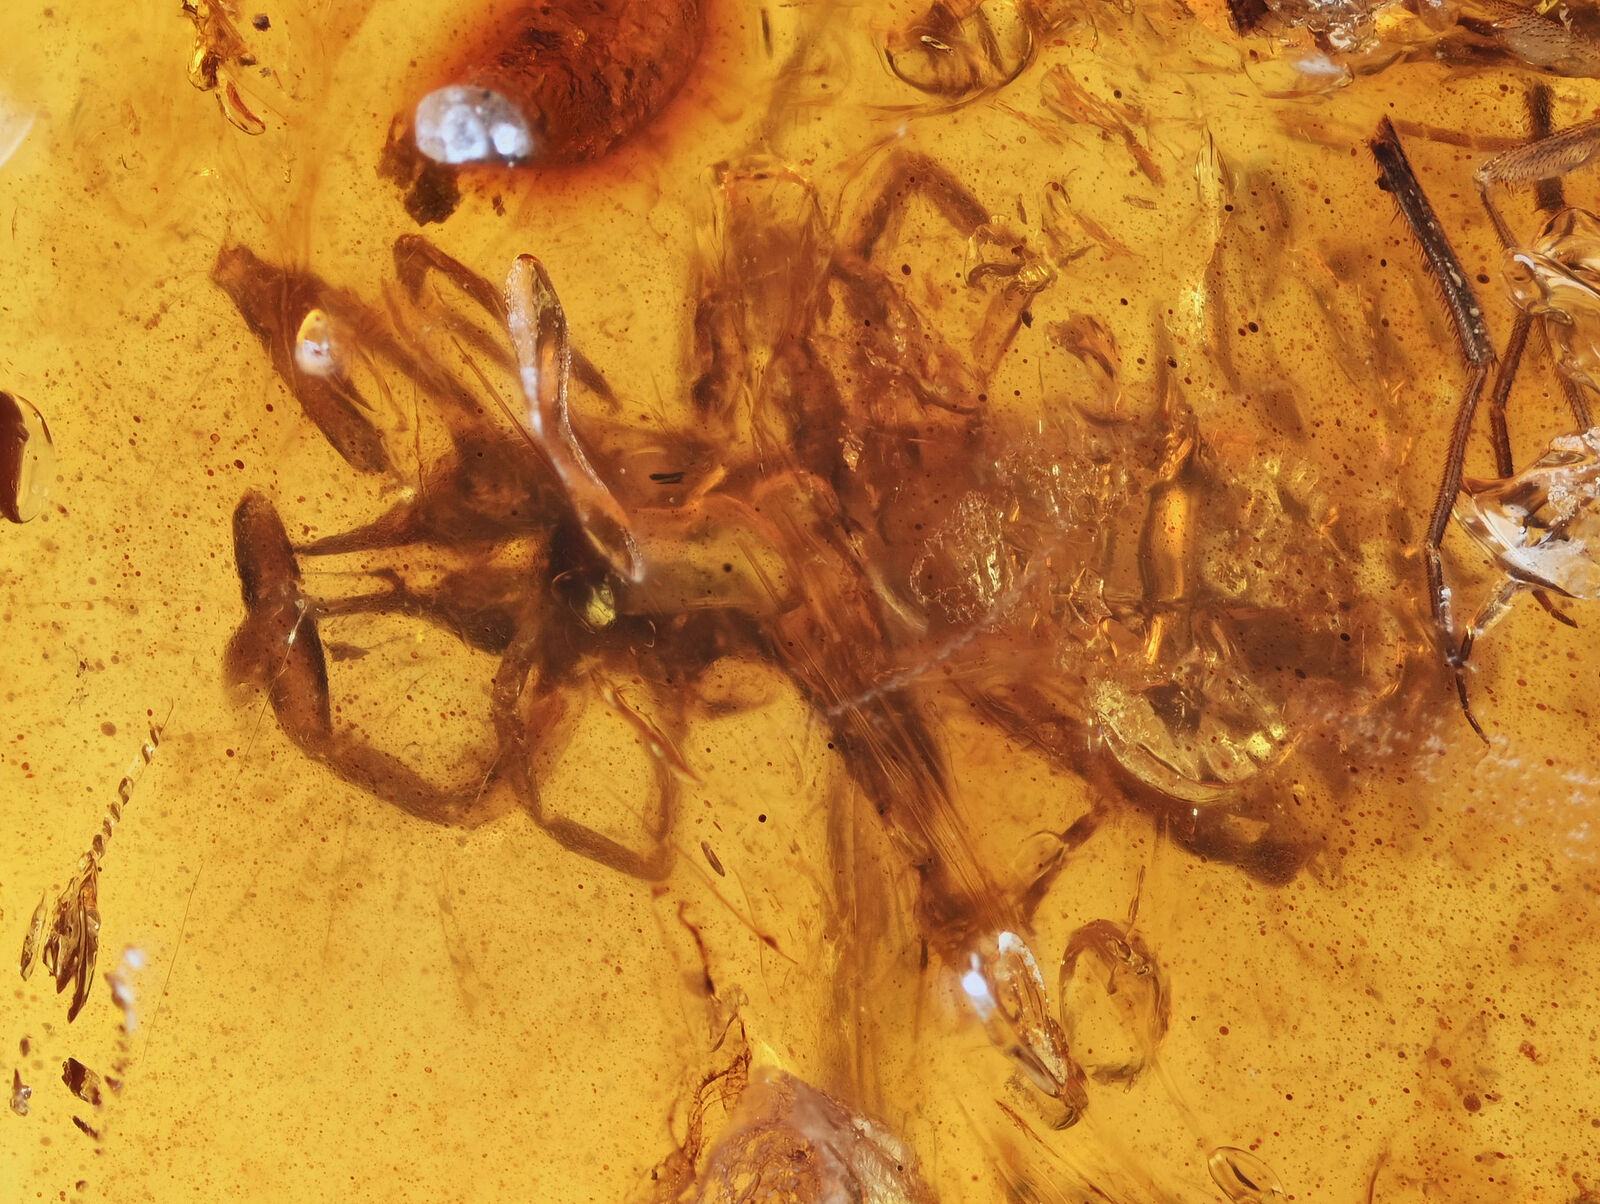 Rare Solifugae (Camel Spider), Fossil inclusion in Burmese Amber